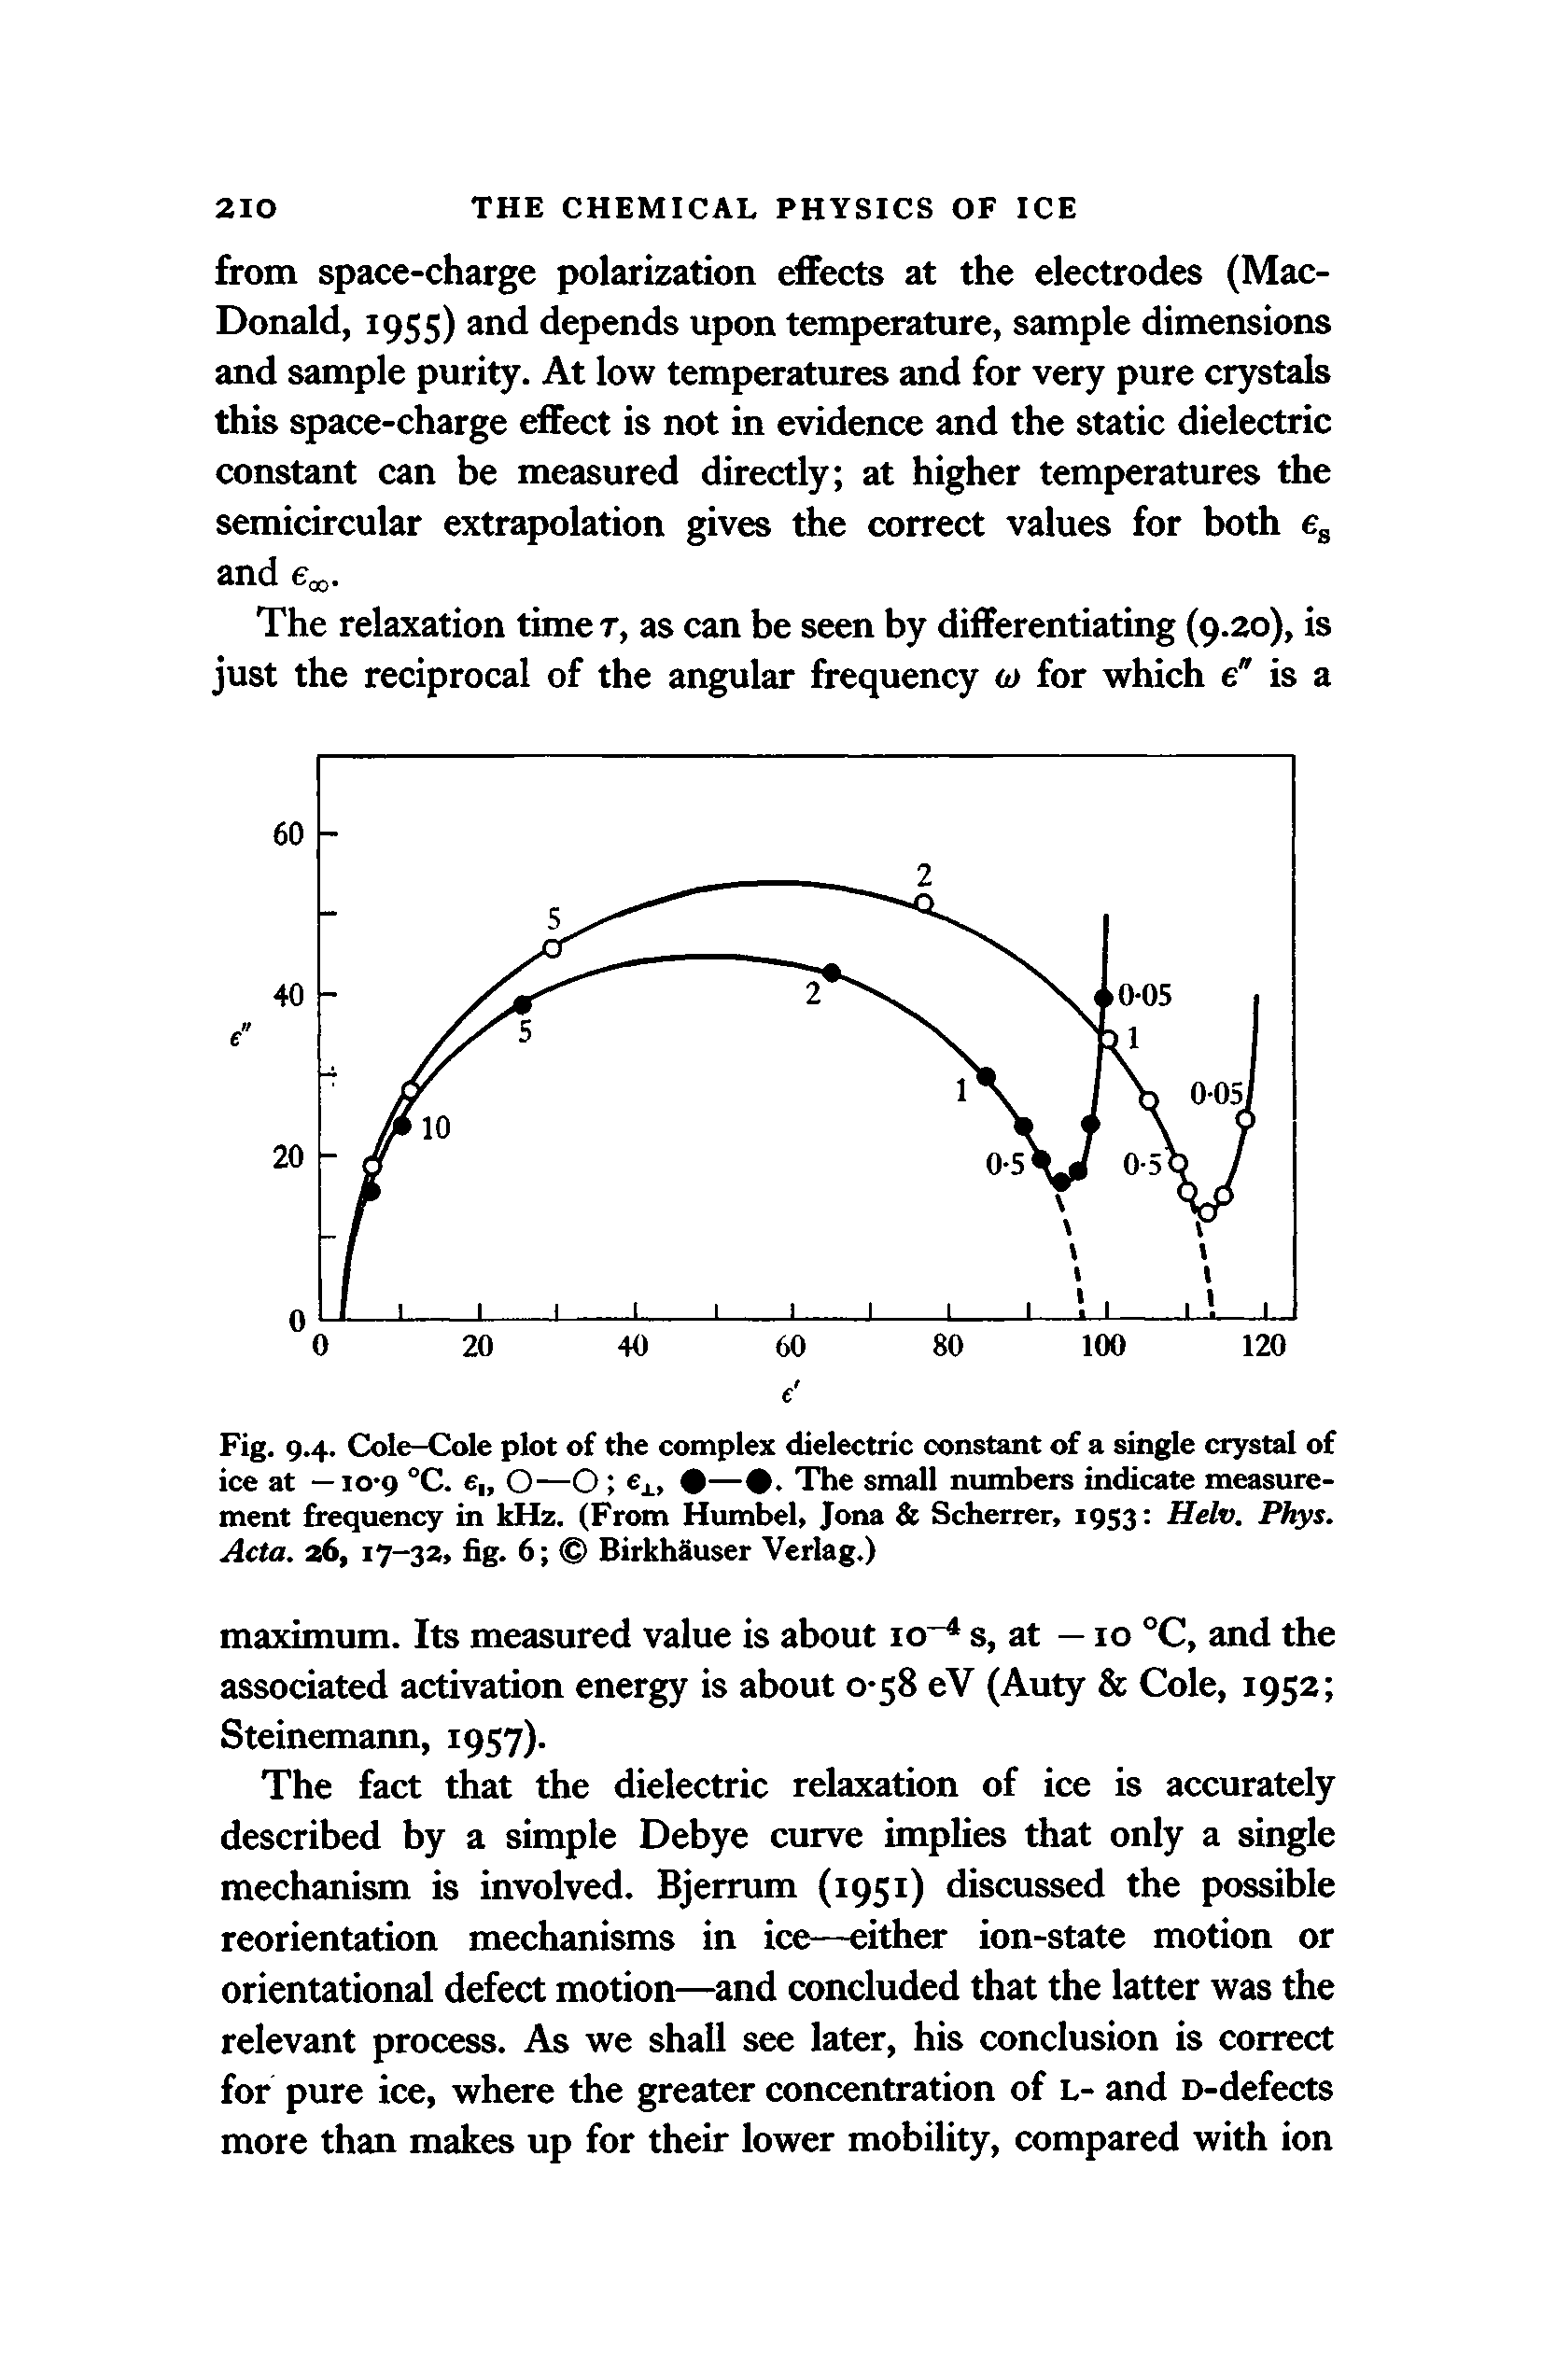 Fig. 9.4. Cole-Cole plot of the complex dielectric constant of a single crystal of ice at —10-9 °C. e O—O fij., — . The small numbers indicate measurement frequency in kHz. (From Humbel, Jona Scherrer, 1953 Helv. Phys. Acta. a6, 17-3Z, fig. 6 Birkhkuser Verlag.)...